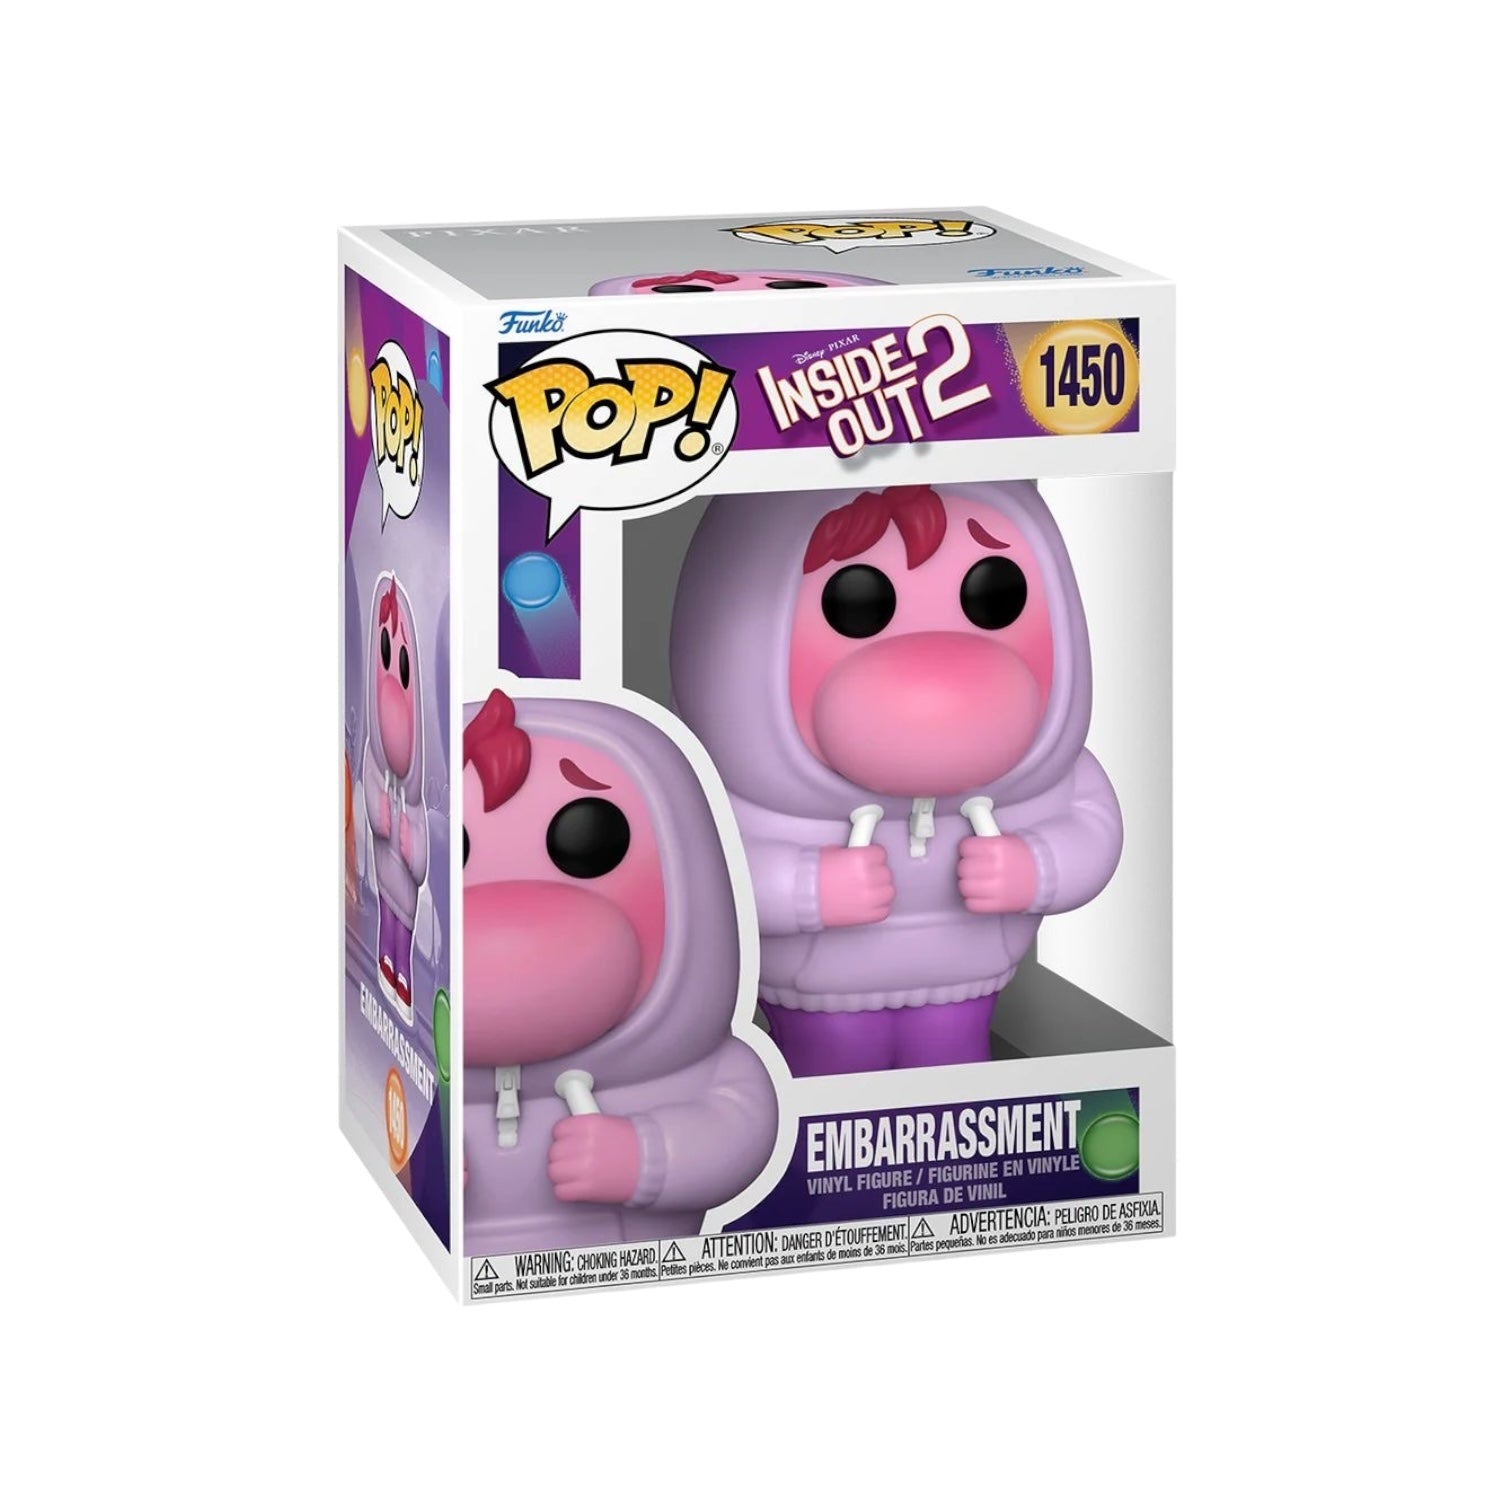 Embarrassment #1450 Funko Pop! - Inside Out 2 - PREORDER